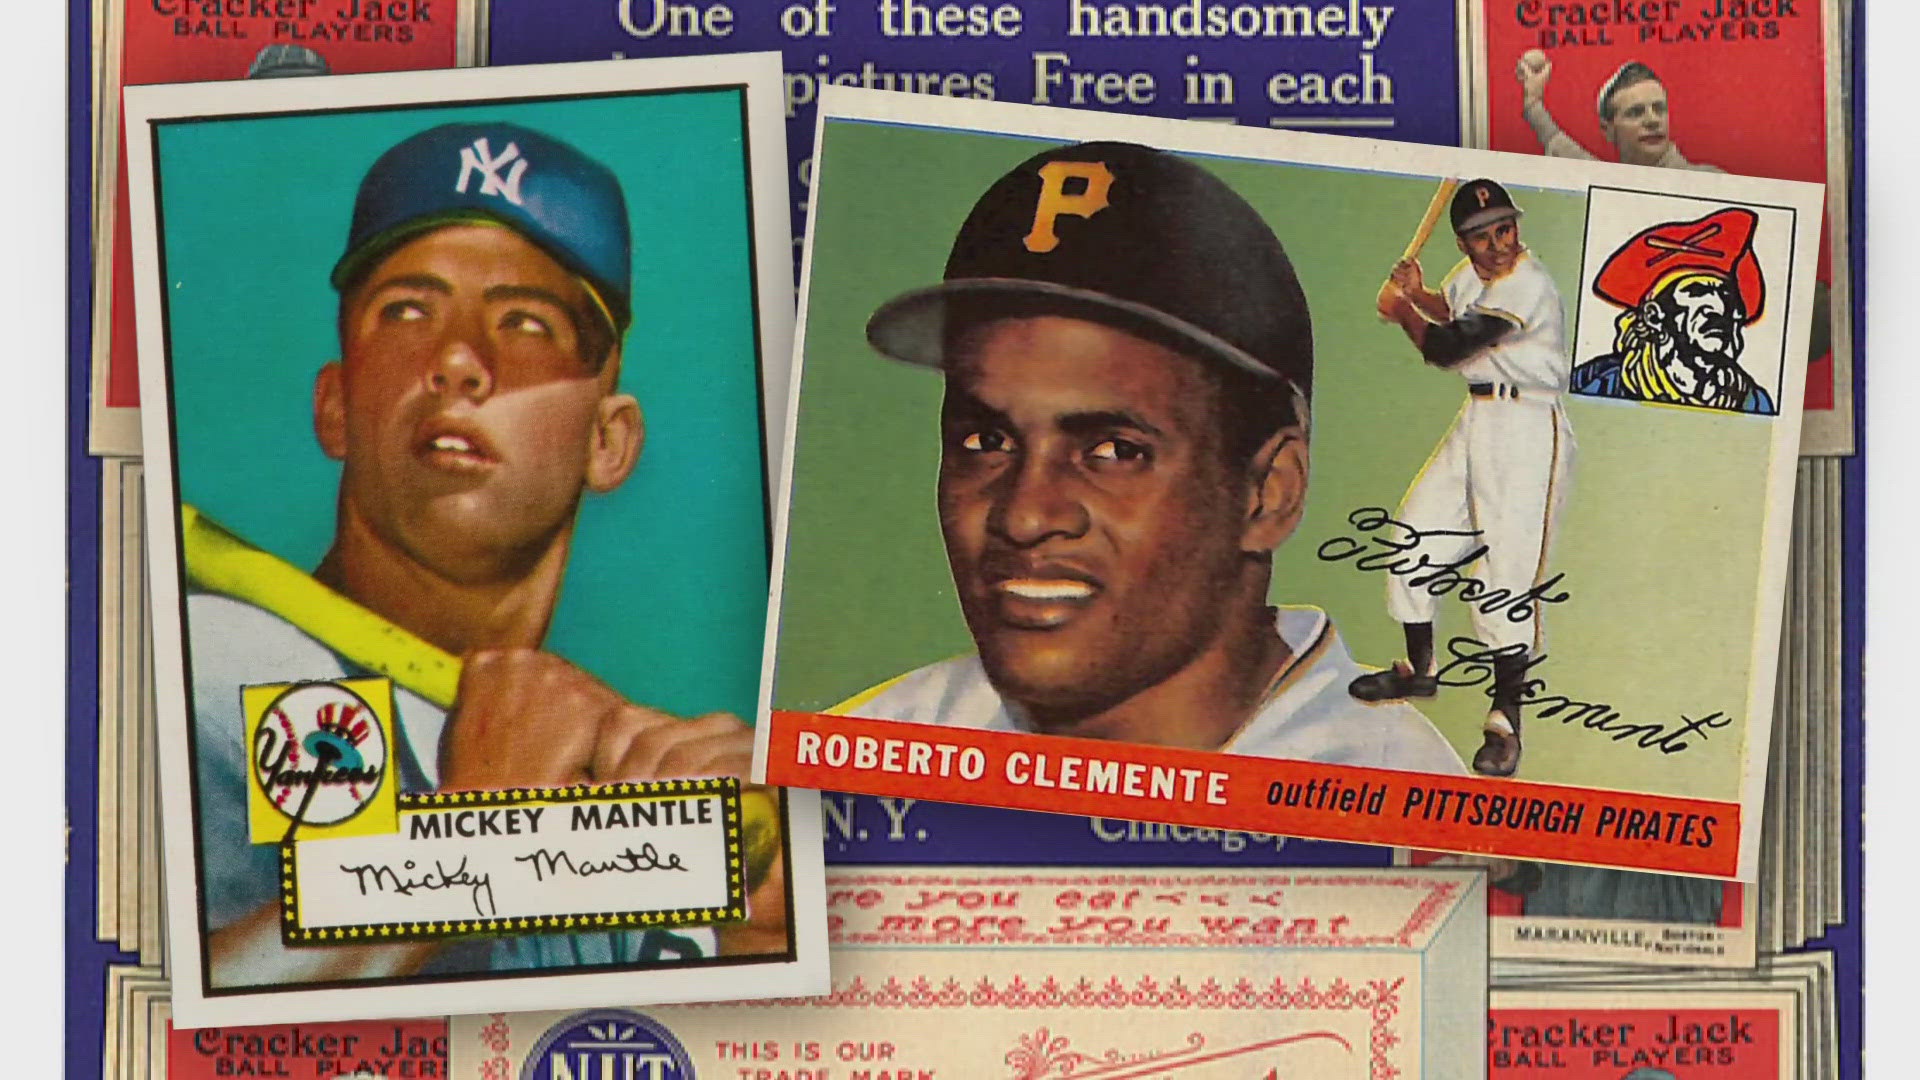 The collection of 54 missing cards includes rare Cracker Jack cards, along with high-quality Mickey Mantle and Roberto Clemente cards. Police are investigating.